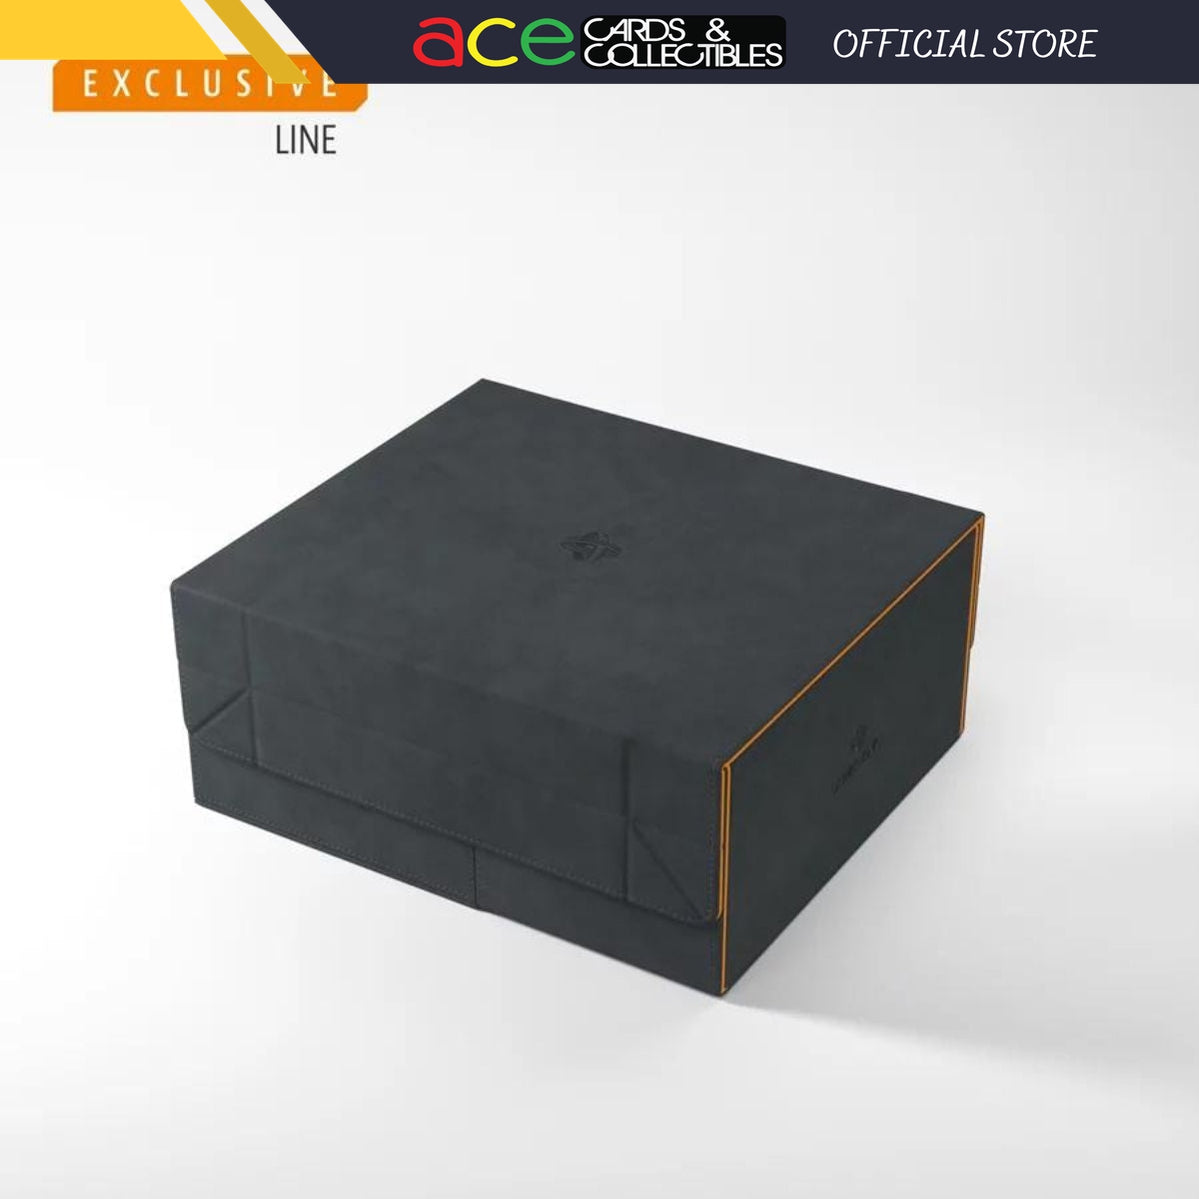 Gamegenic Storage Box "Games’ Lair 600+ Convertible"-Black/Orange-Gamegenic-Ace Cards & Collectibles